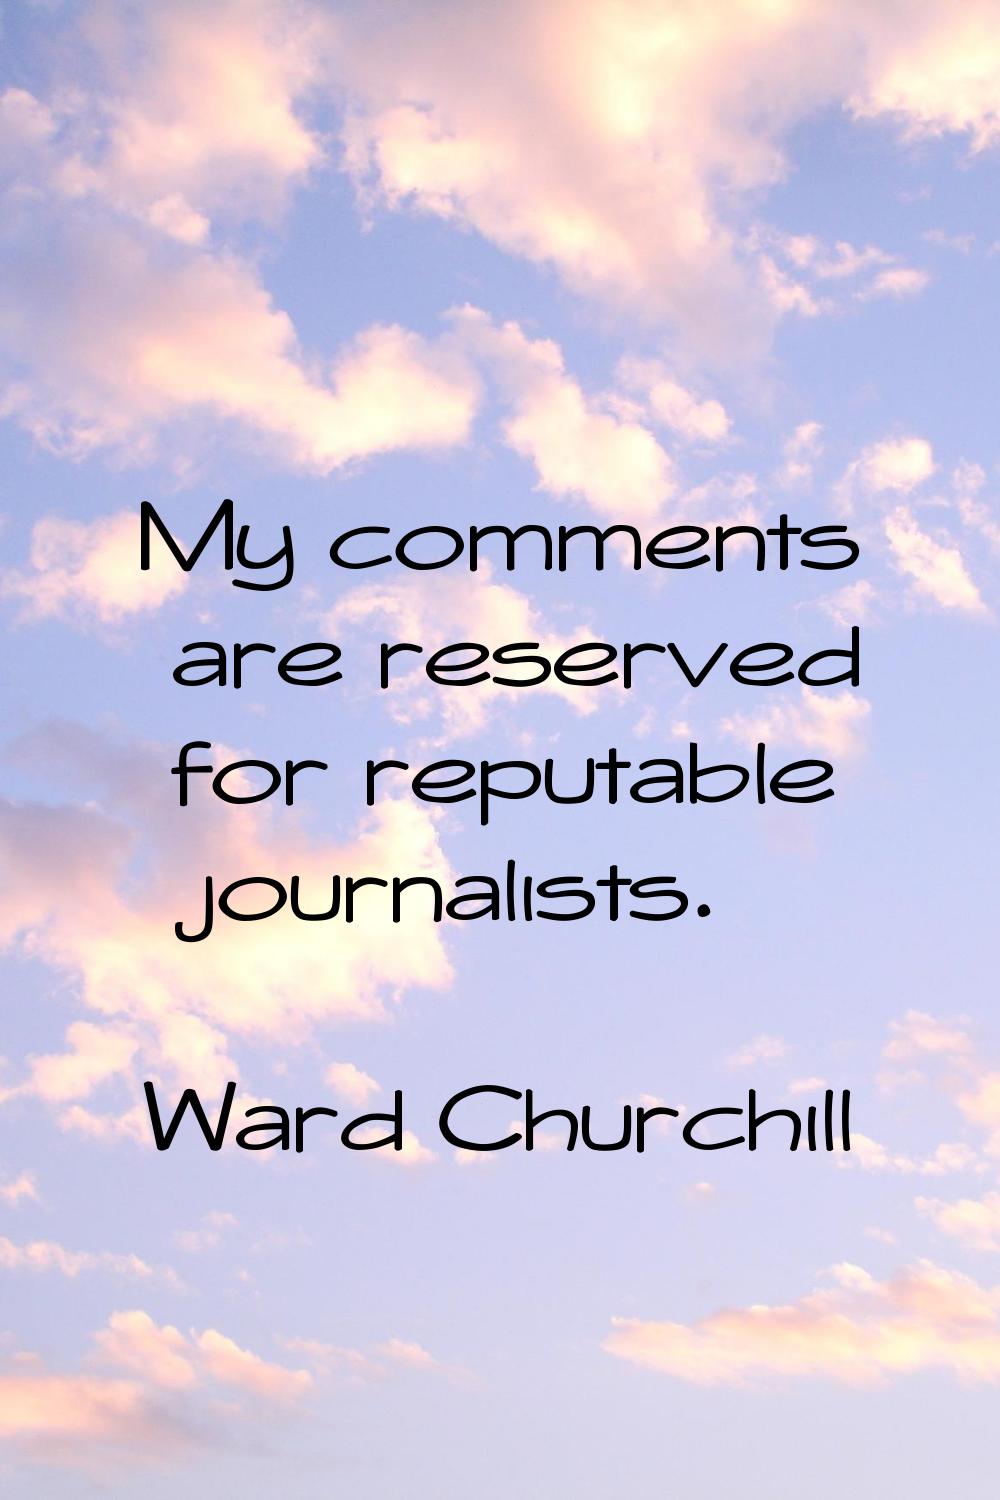 My comments are reserved for reputable journalists.